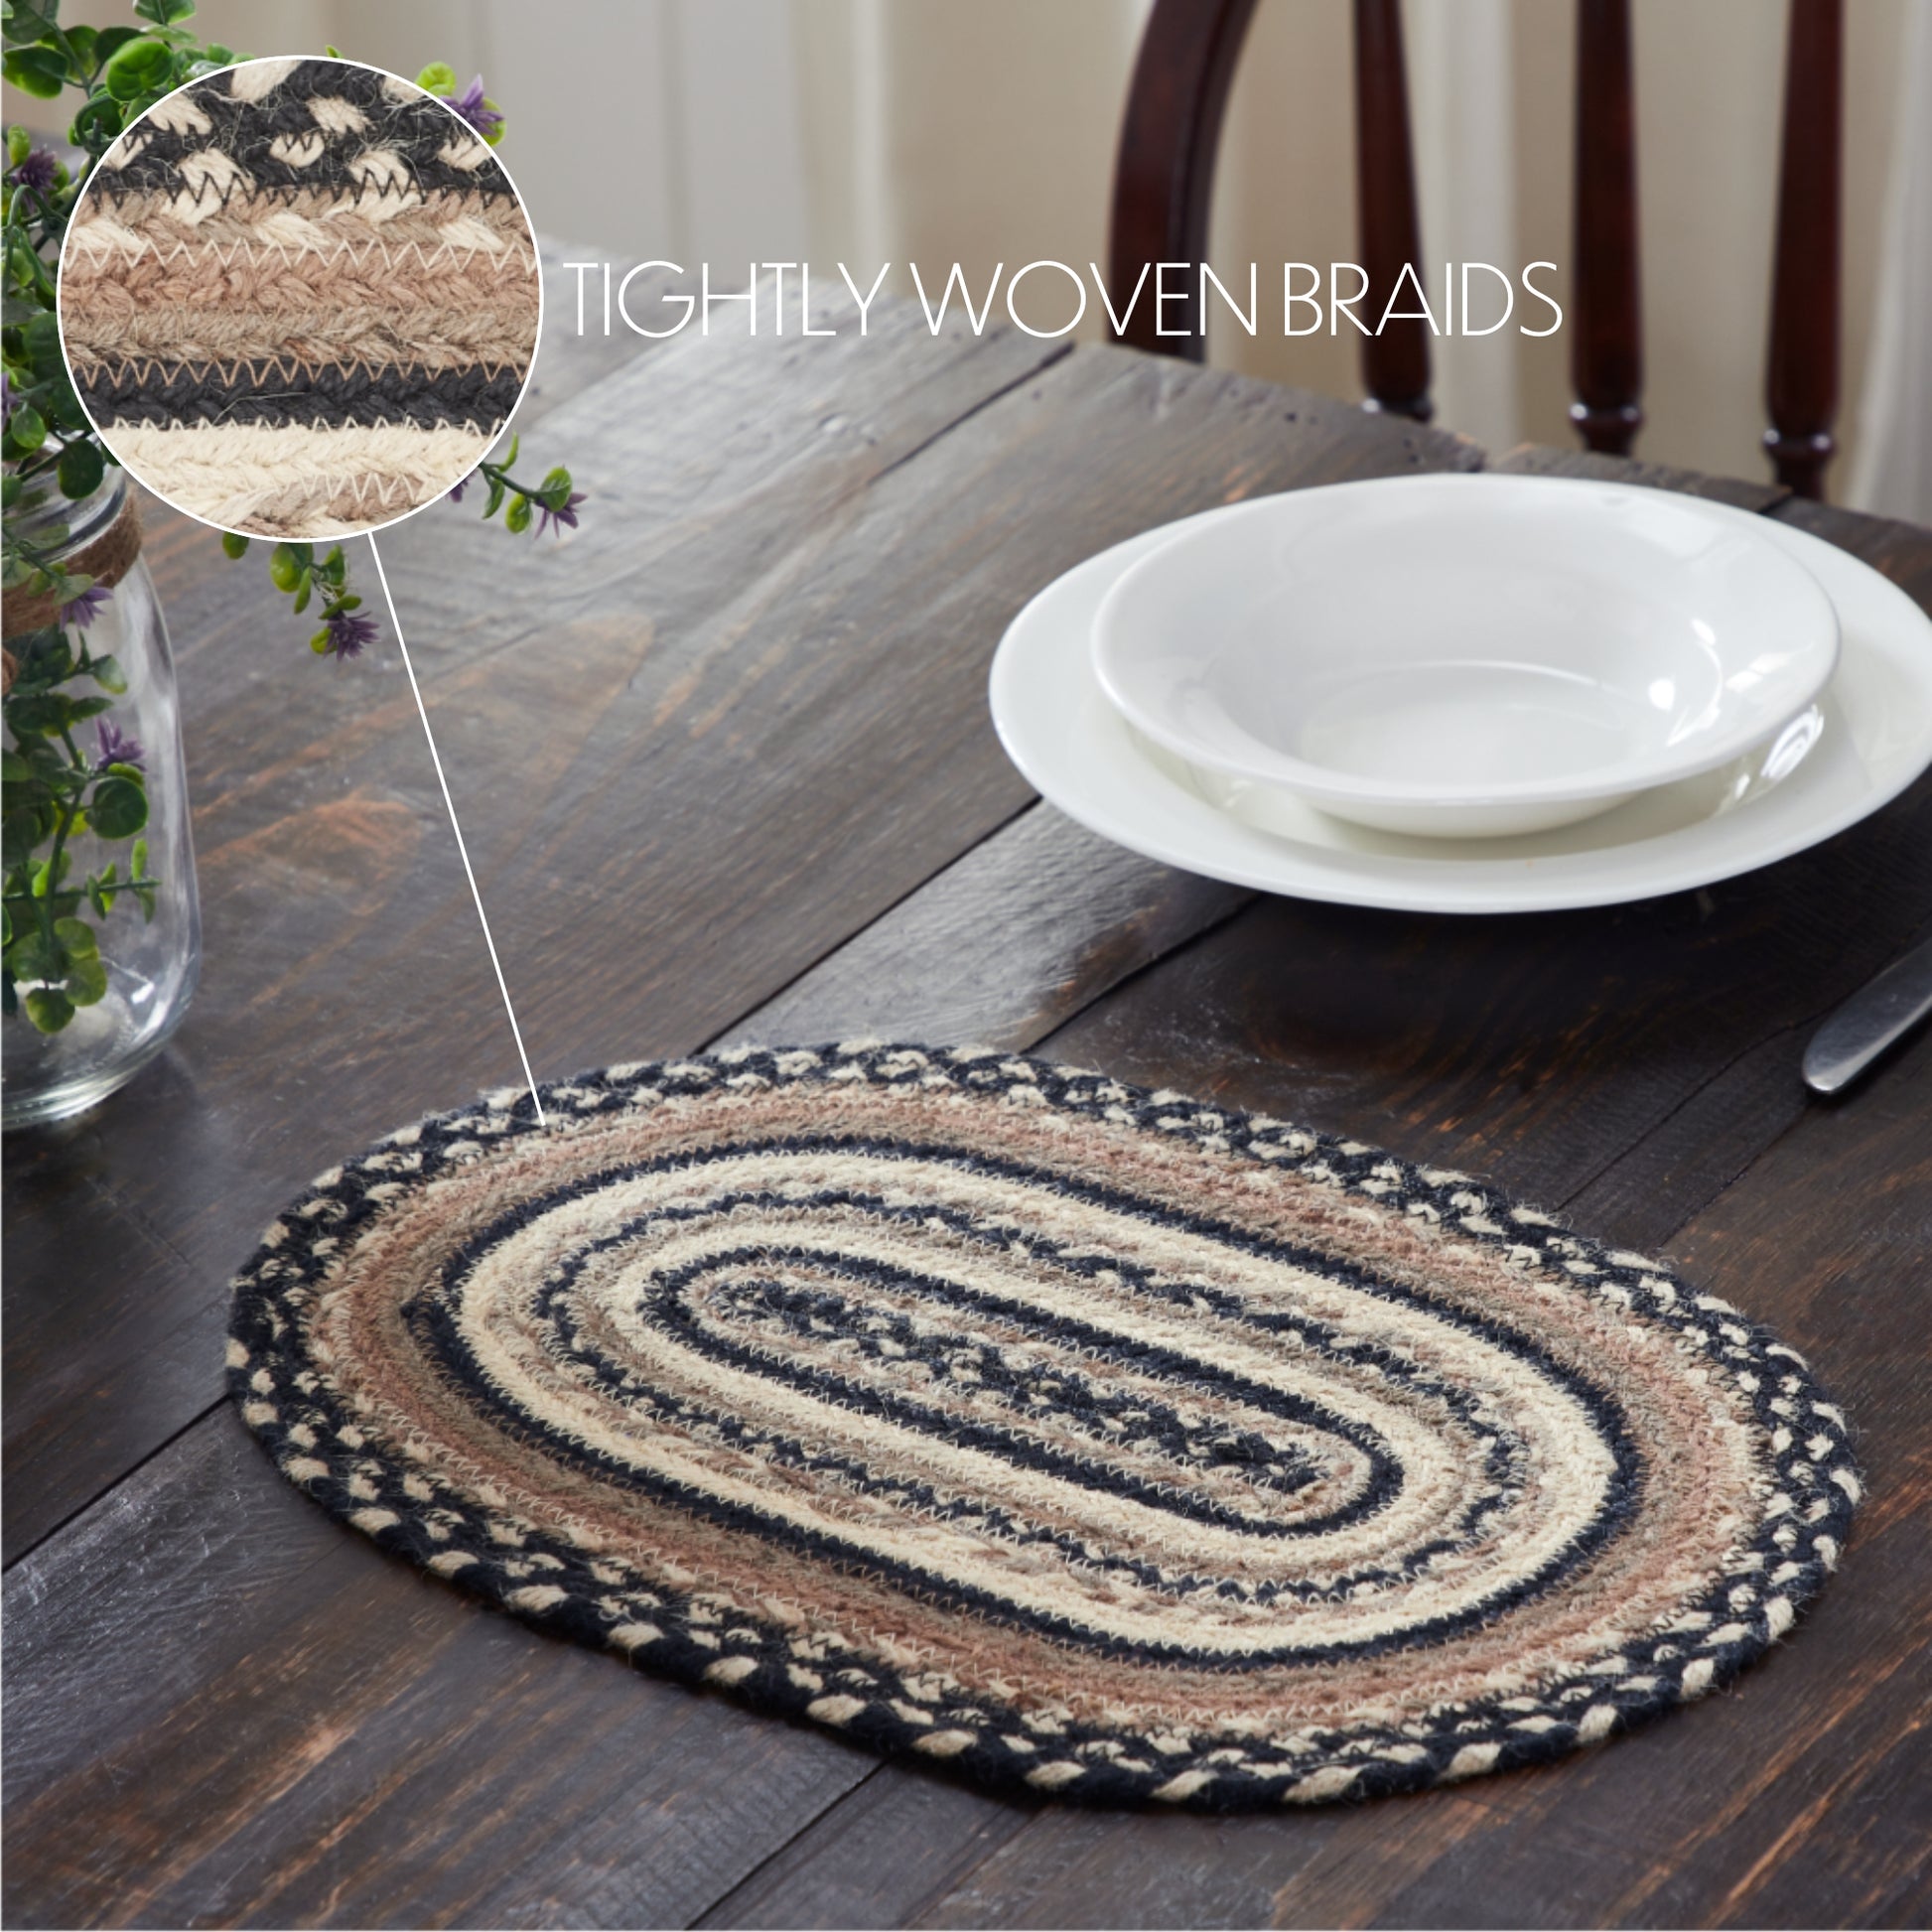 81447-Sawyer-Mill-Charcoal-Creme-Jute-Oval-Placemat-10x15-image-2